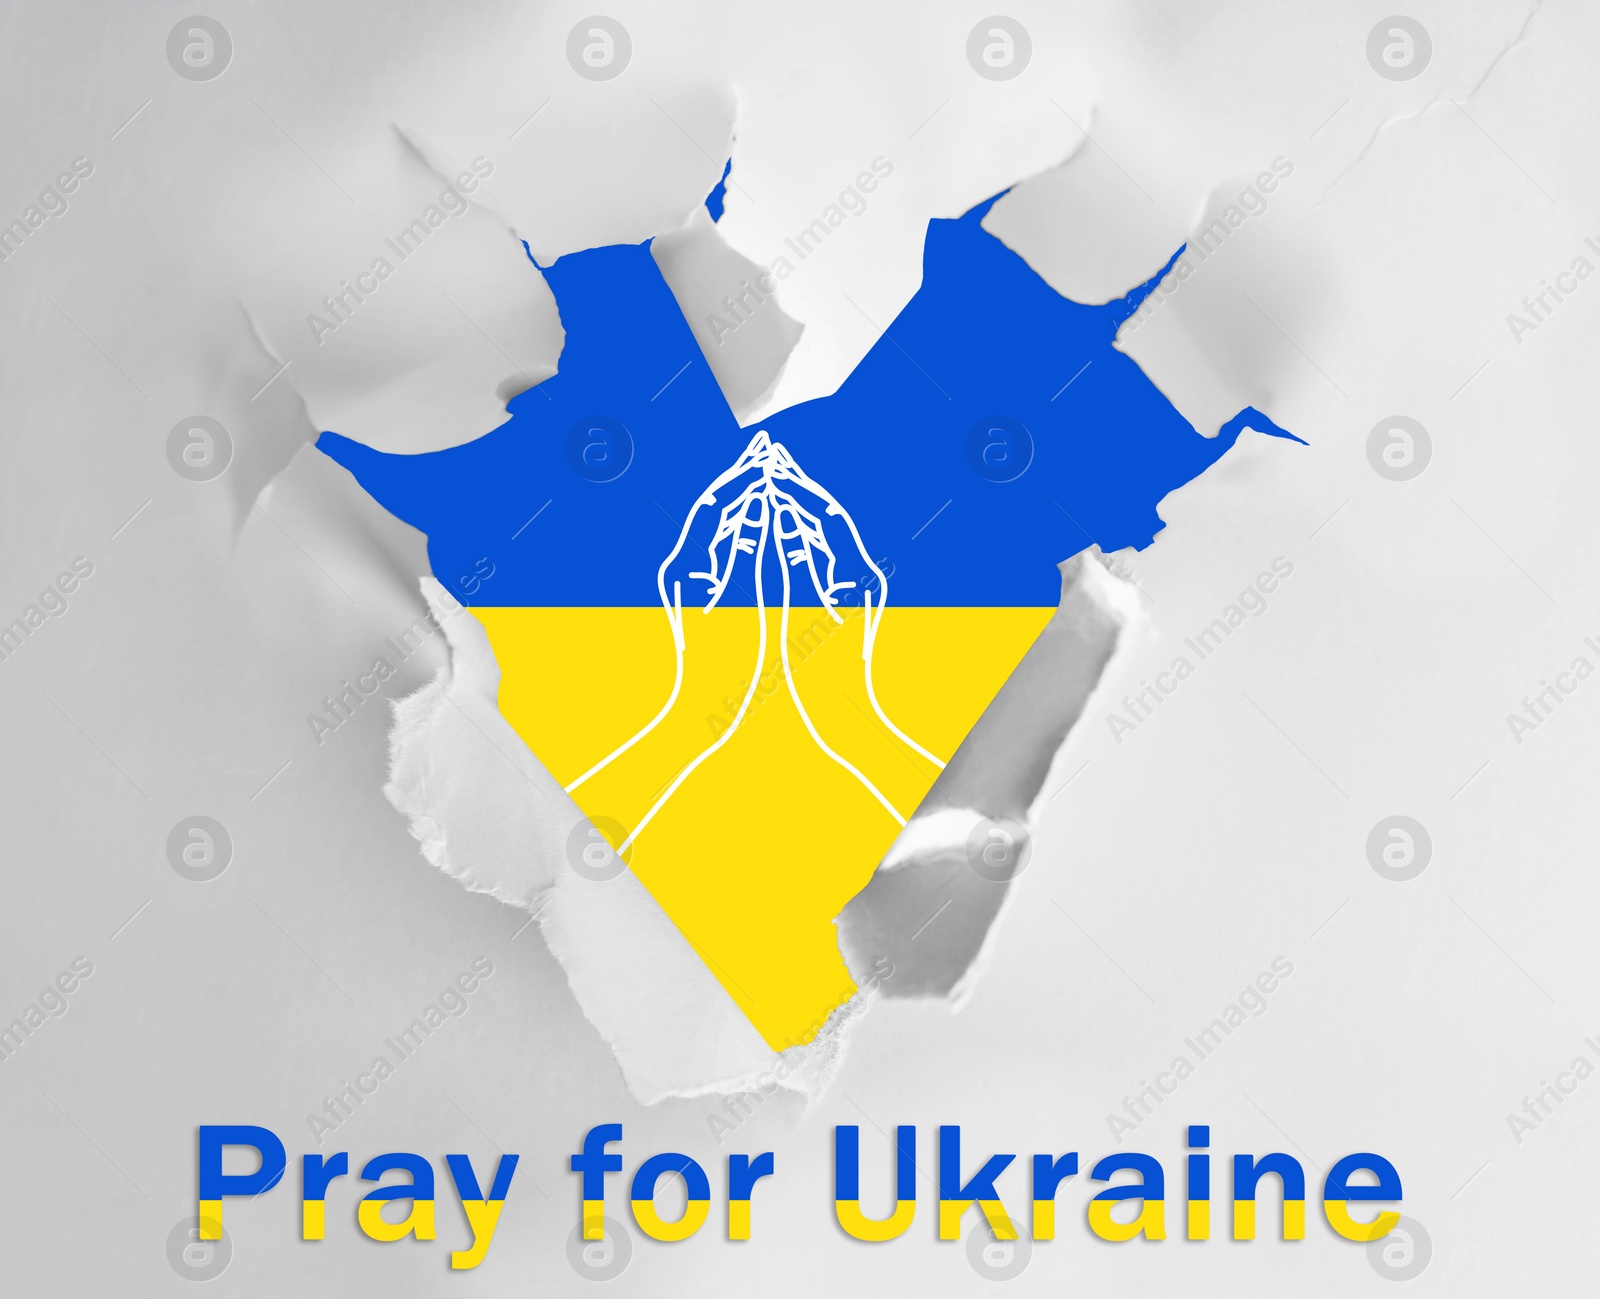 Illustration of Pray For Ukraine. Ukrainian flag with illustration of hands, view through heart shaped hole in white paper with phrase